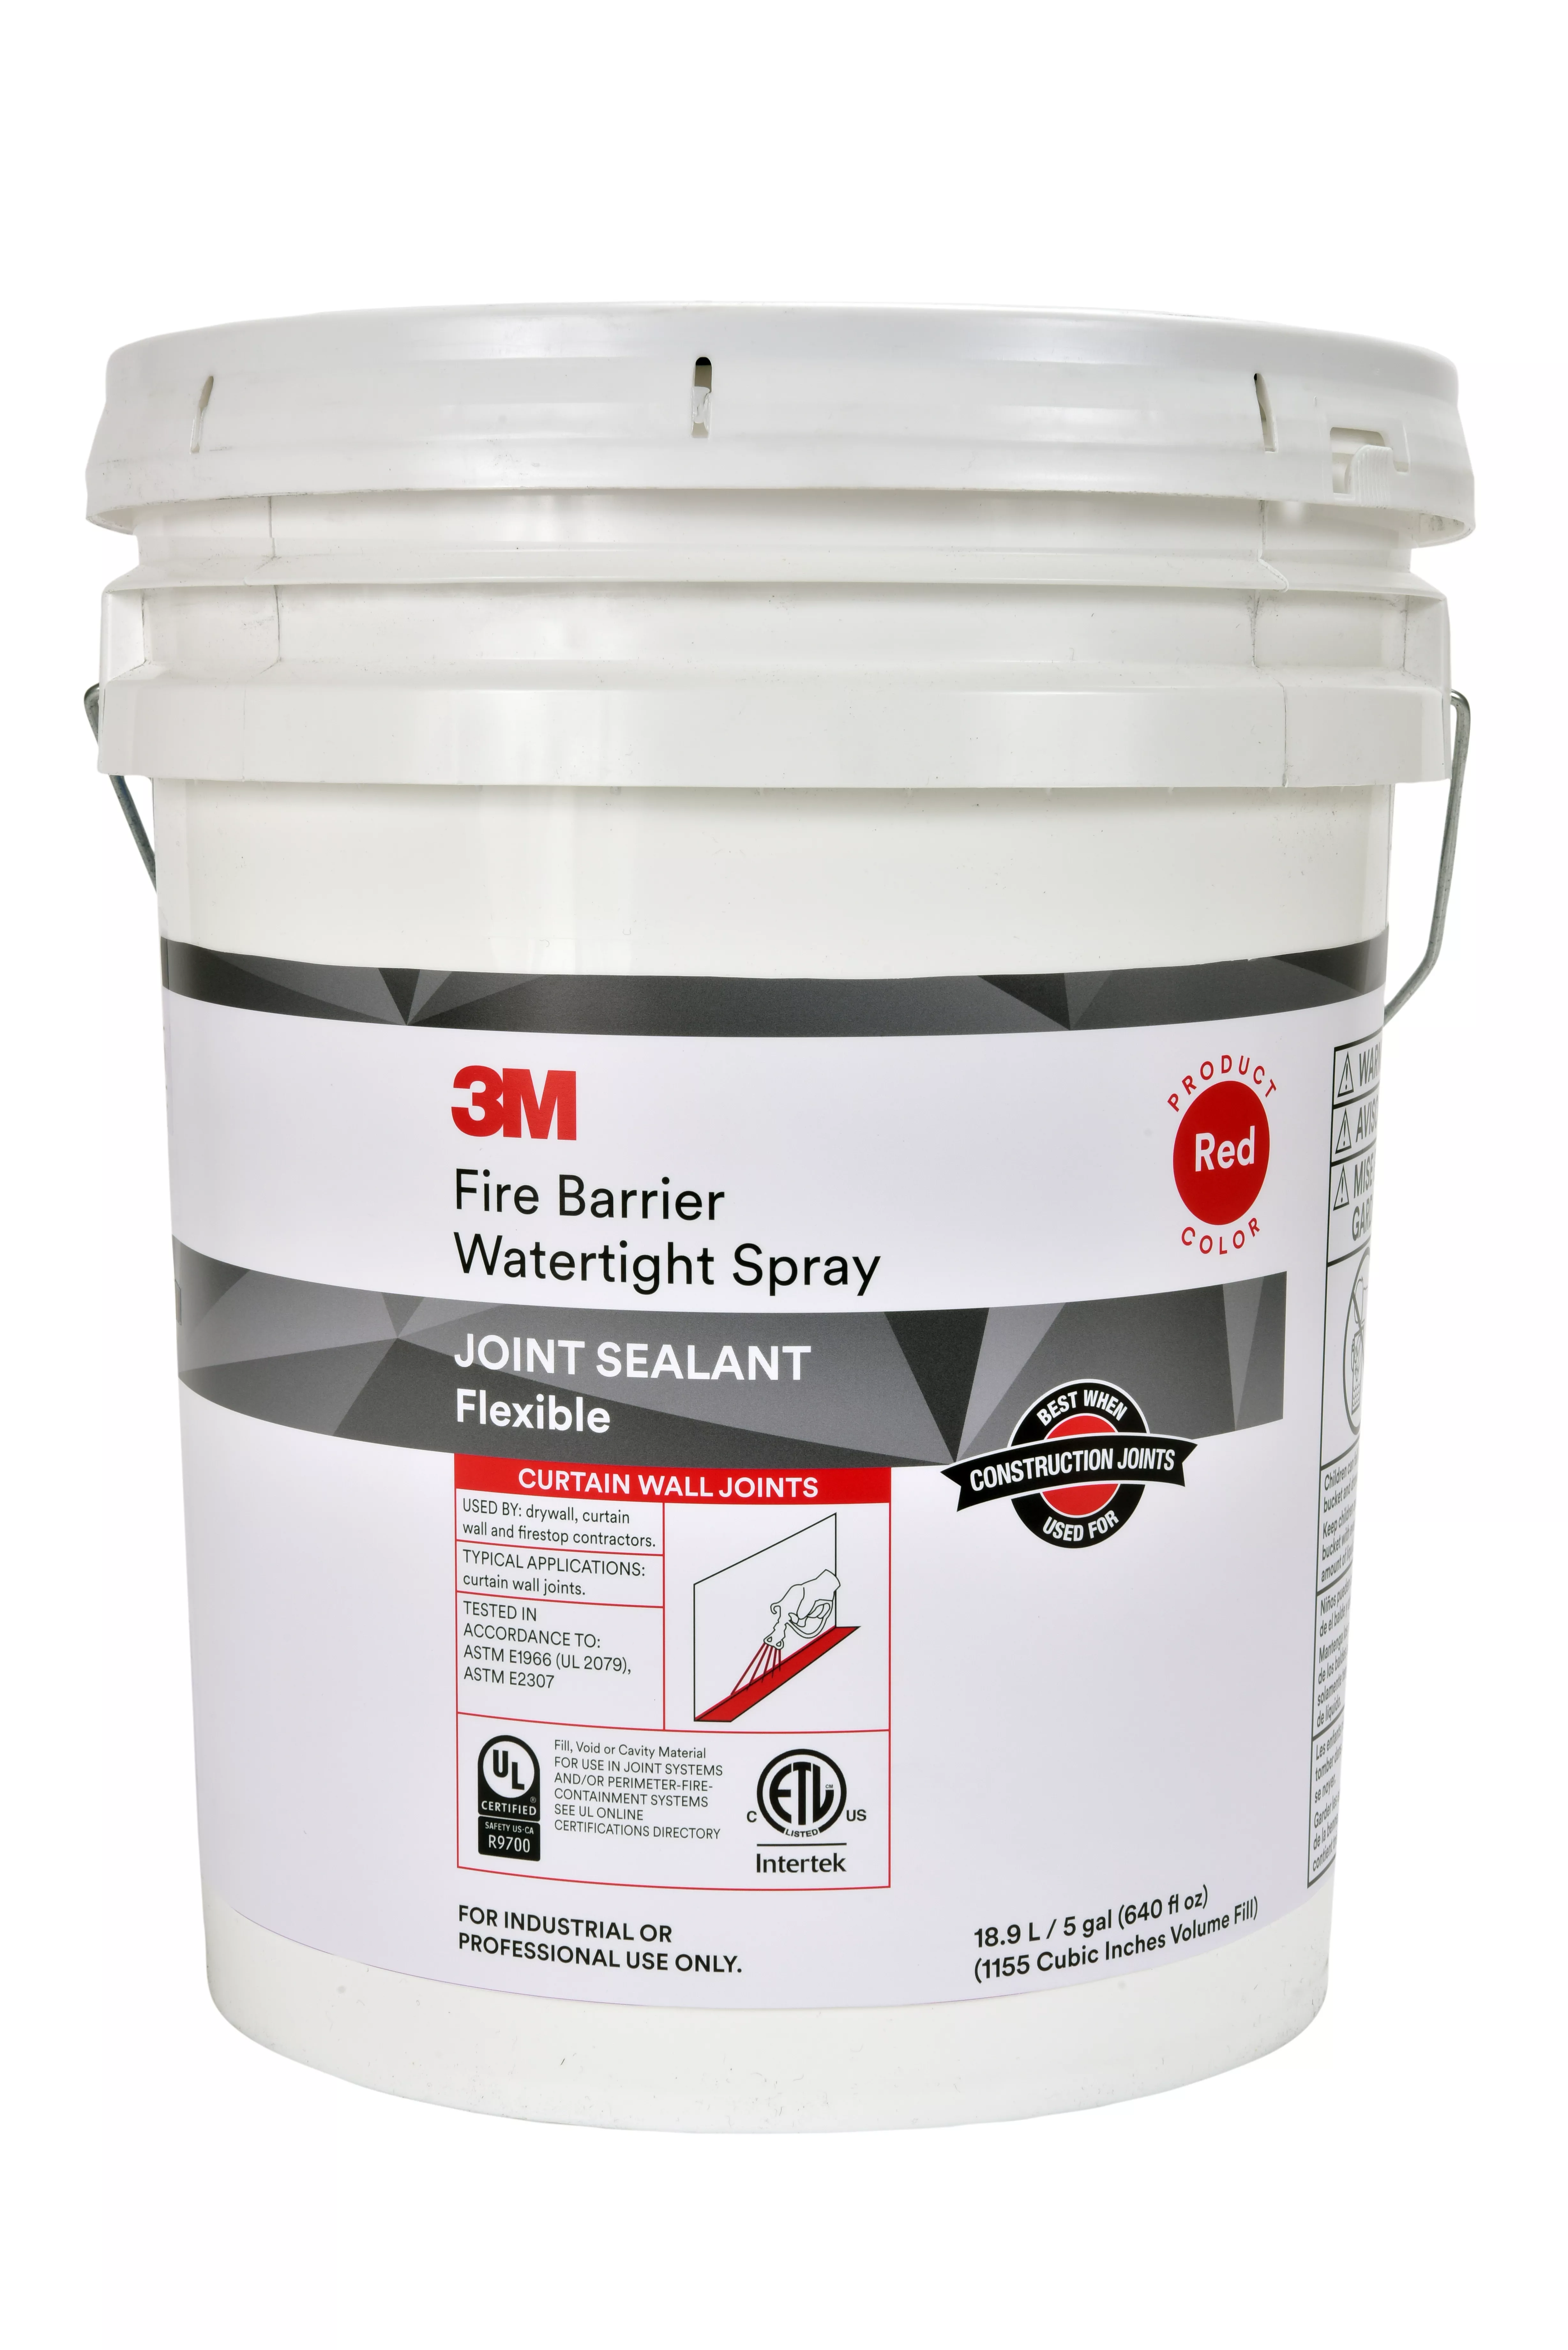 3M™ Fire Barrier Water Tight Spray, Red, 5 Gallon (Pail), Drum